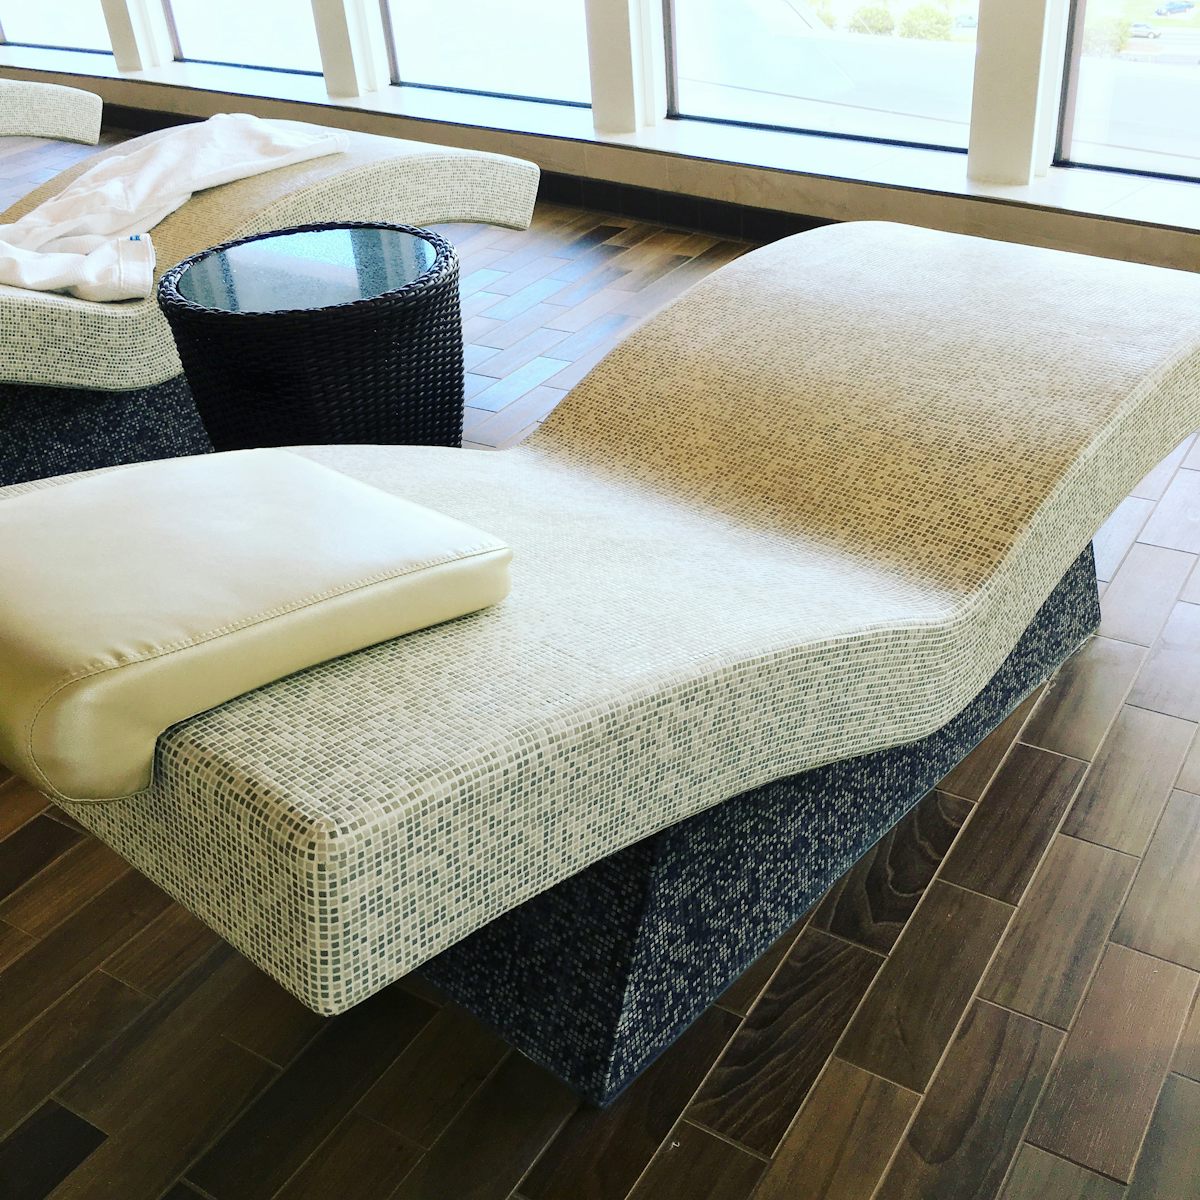 Heated Marble lounger in the spa. $200 per person for spa privileges during the cruise. Worth it since everywhere else was incredibly crowded.